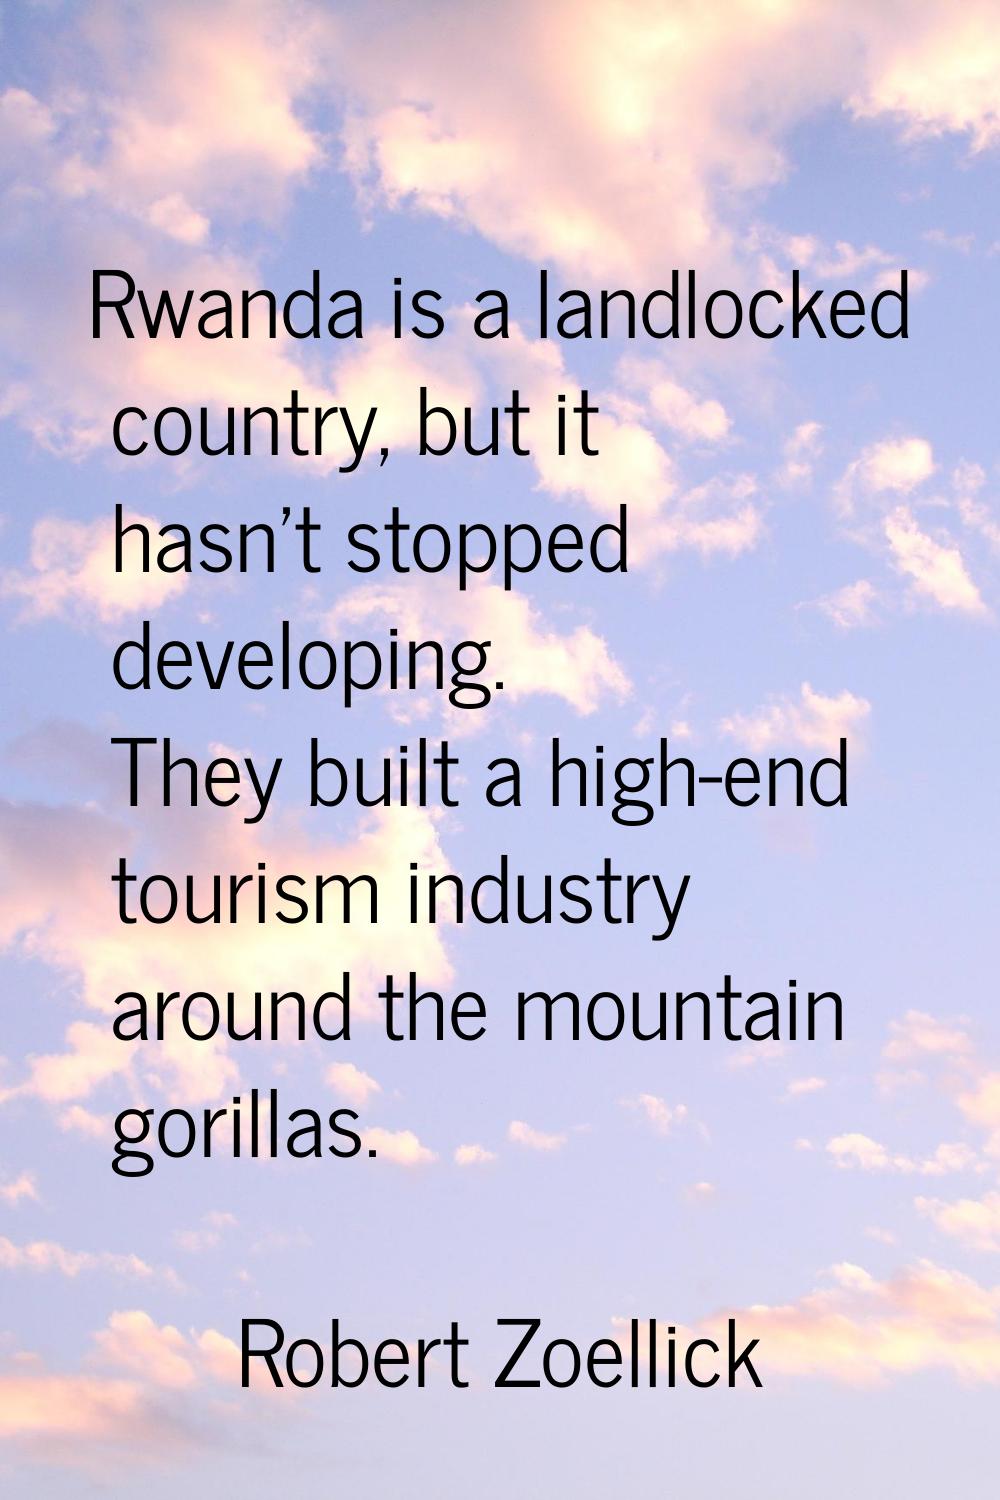 Rwanda is a landlocked country, but it hasn't stopped developing. They built a high-end tourism ind